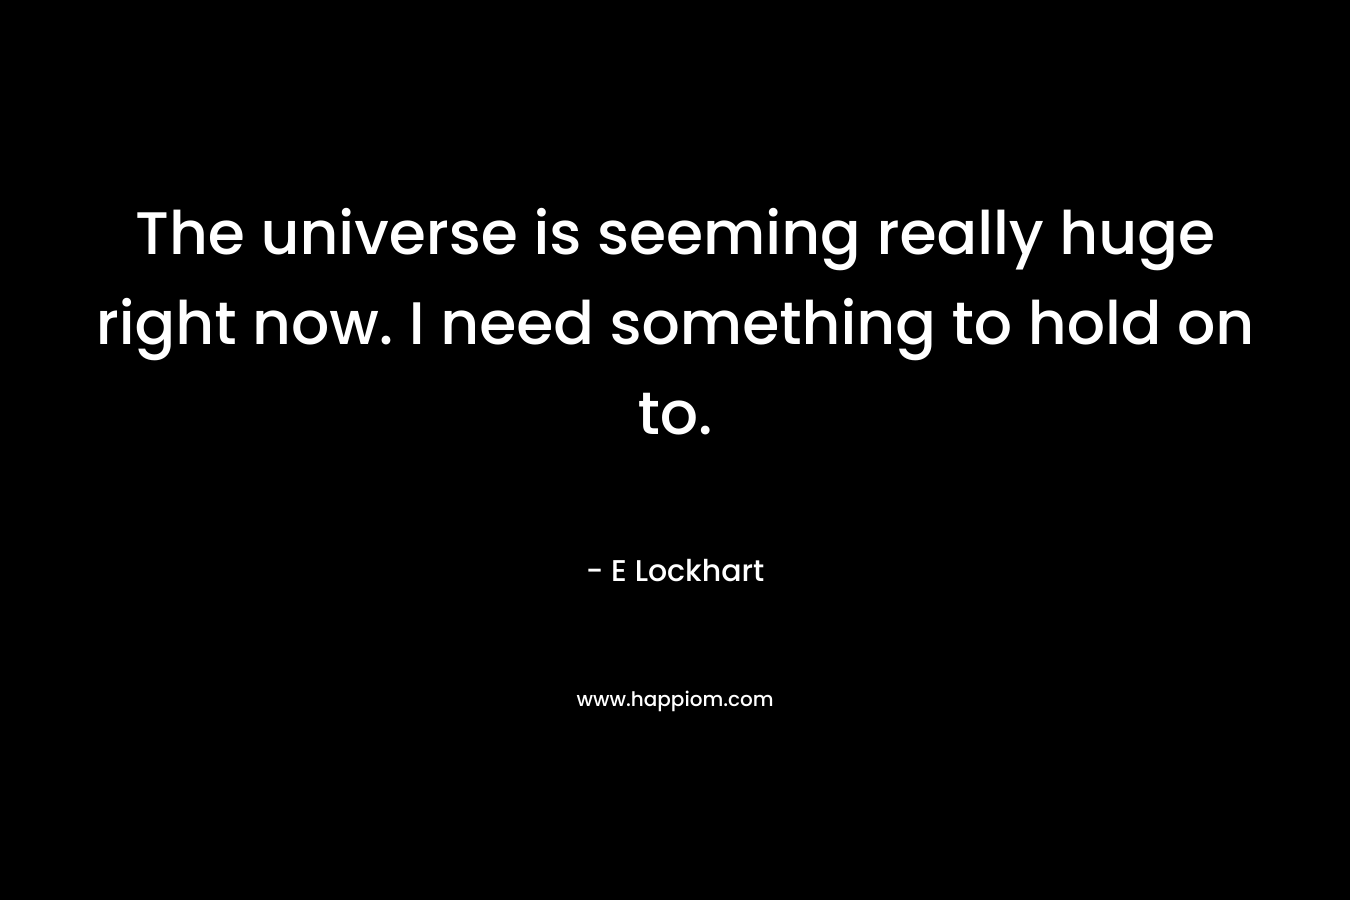 The universe is seeming really huge right now. I need something to hold on to. – E Lockhart